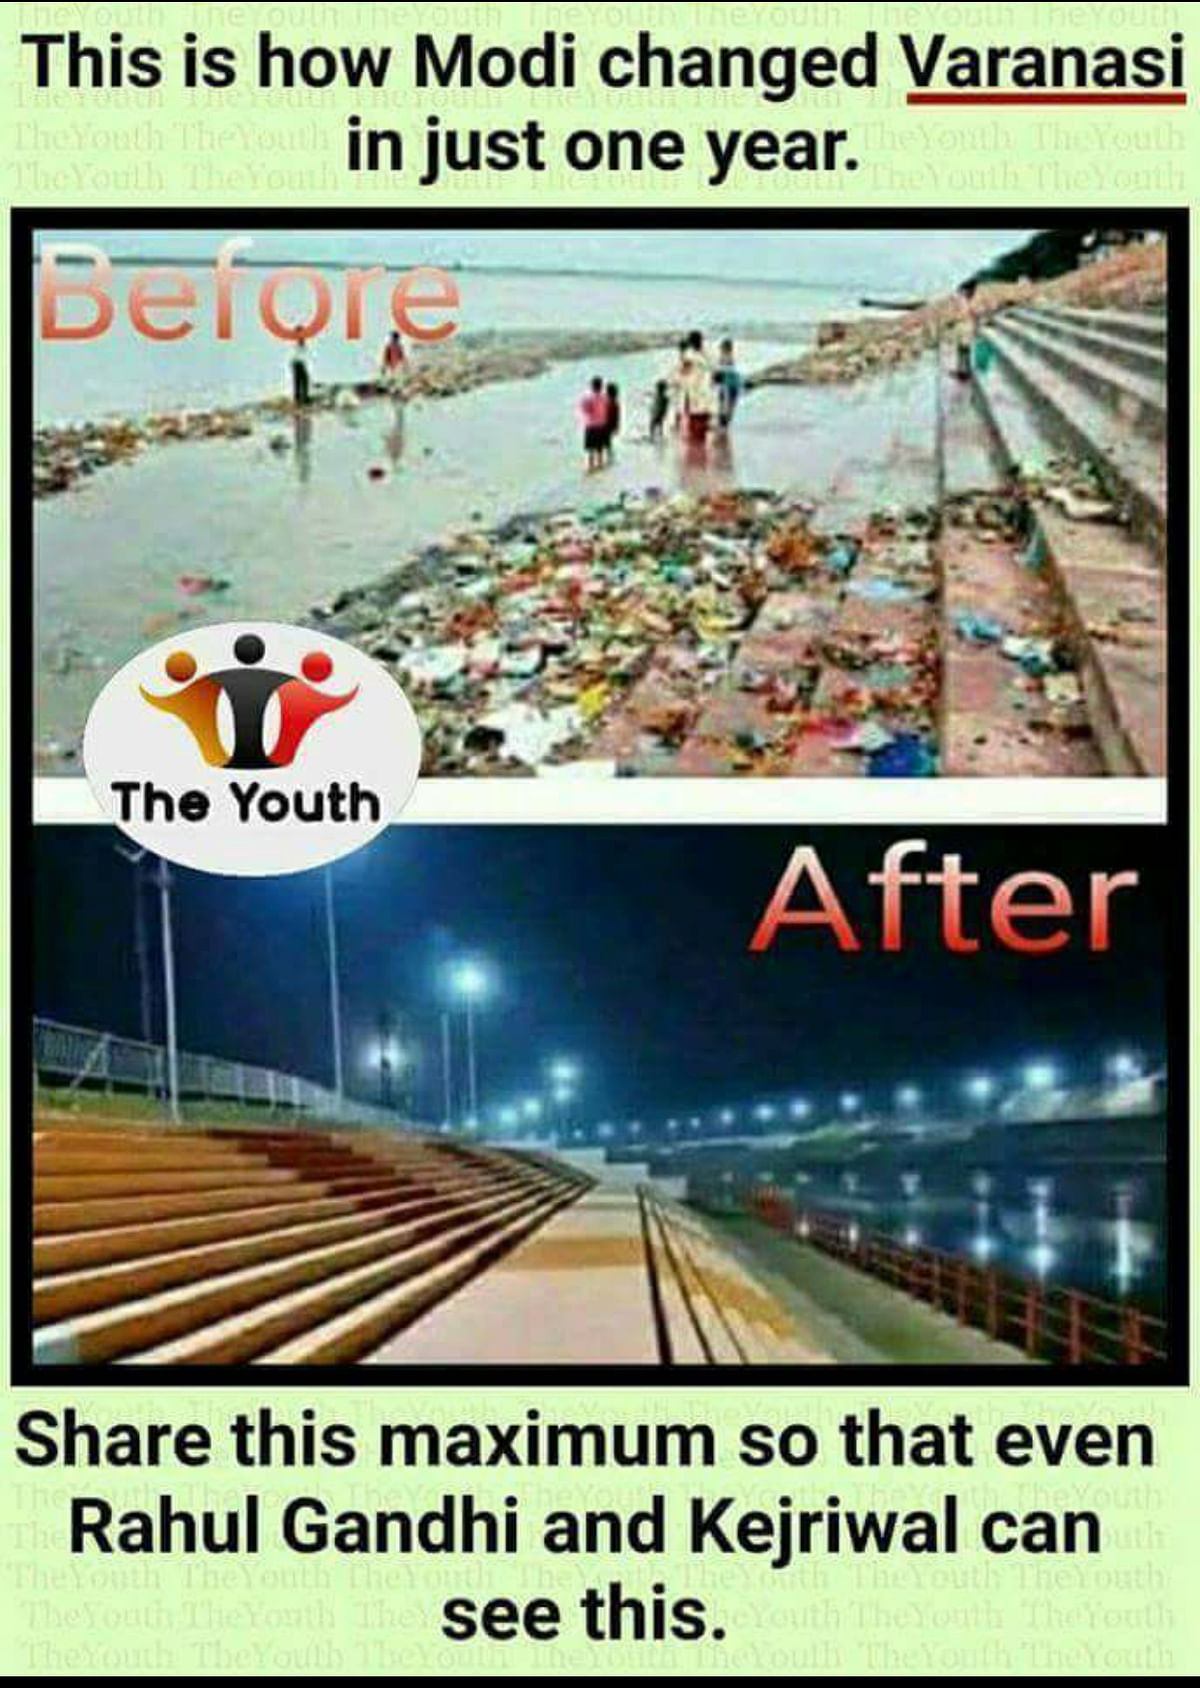 The original picture shows the ghats of Shipra the river, before and after they were cleaned for the 2016 Kumbh Mela